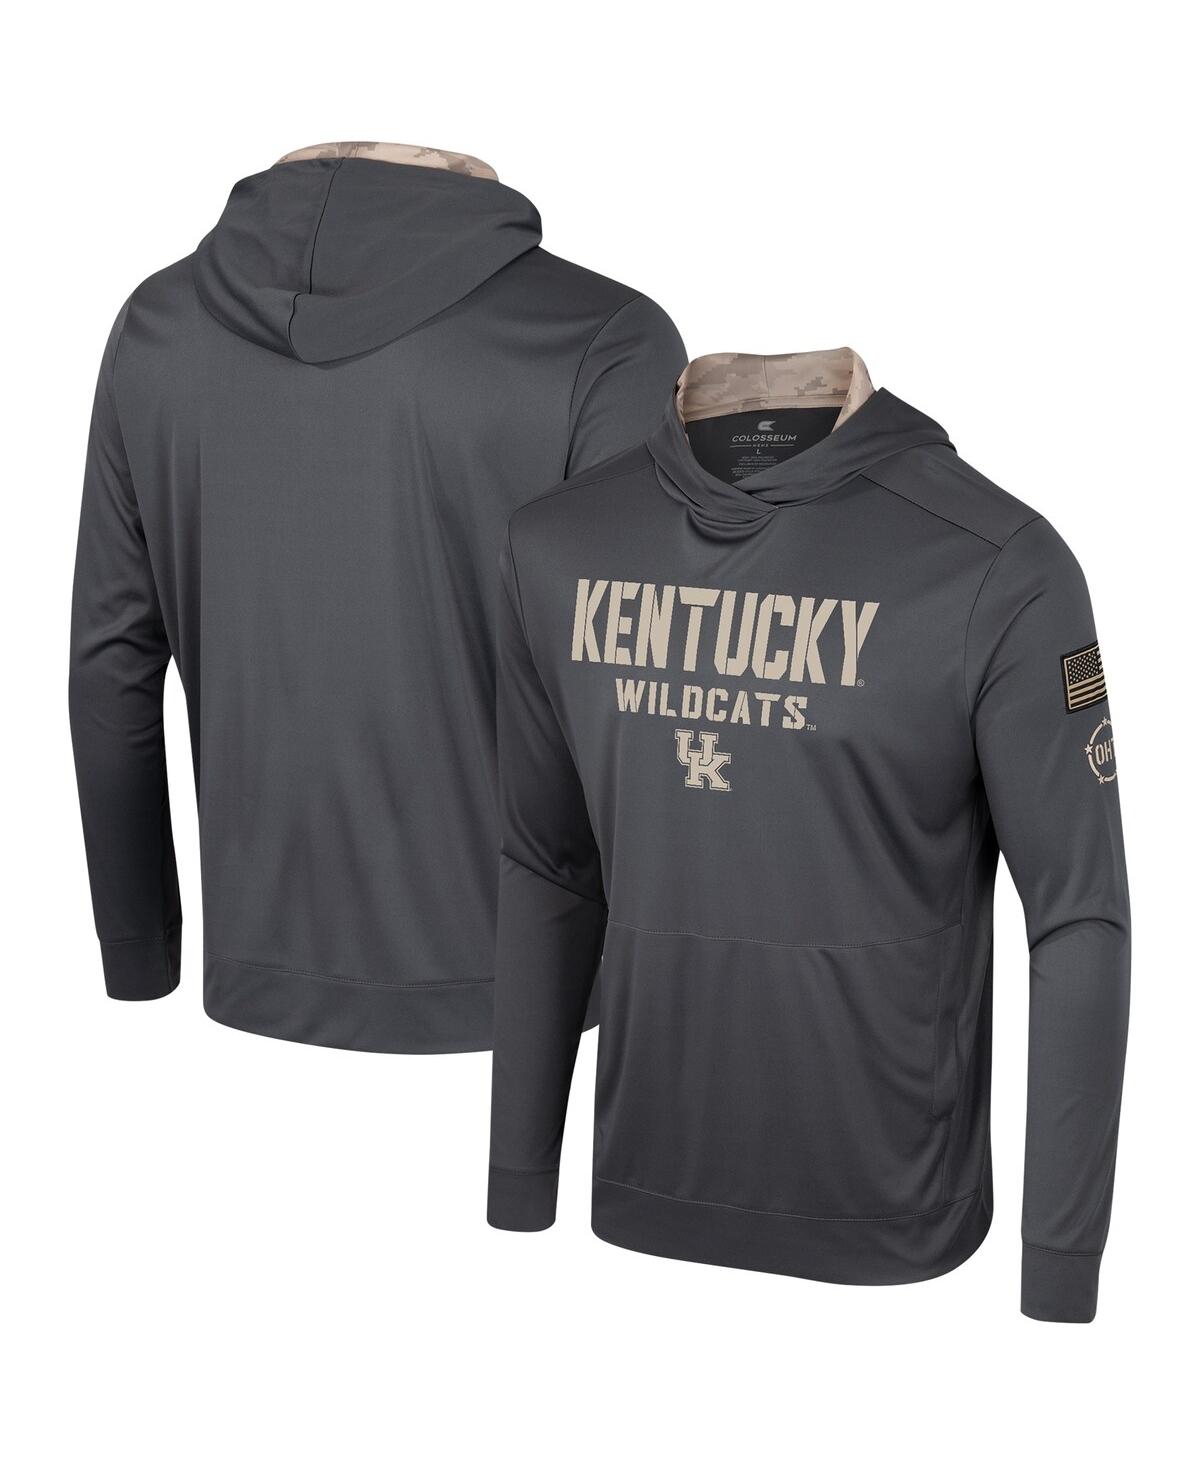 Colosseum Men's  Charcoal Kentucky Wildcats Oht Military-inspired Appreciation Long Sleeve Hoodie T-s